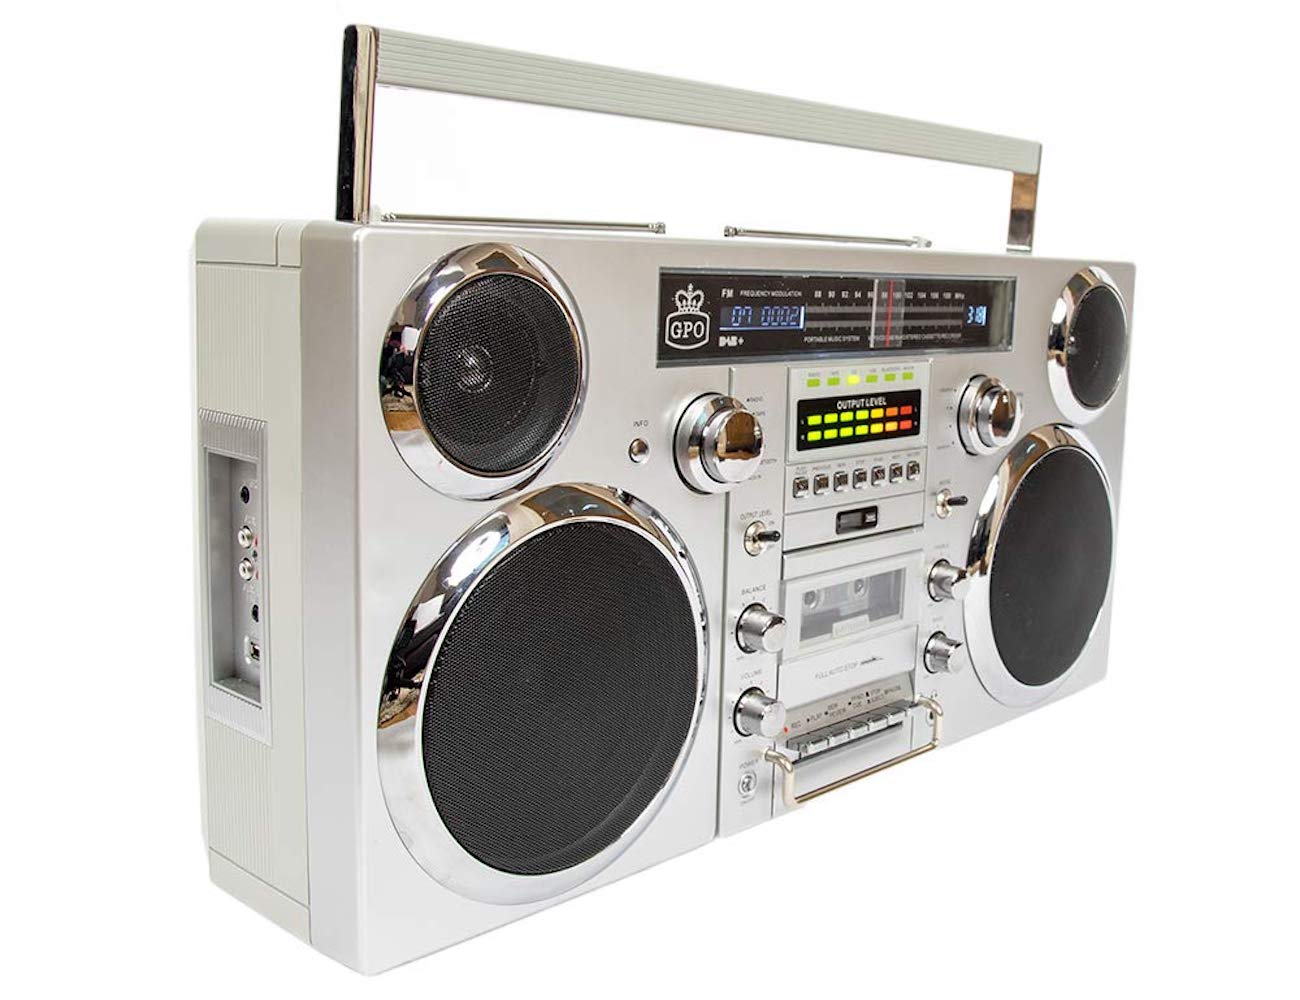 GPO Brooklyn is a retro boombox that can connect via Bluetooth